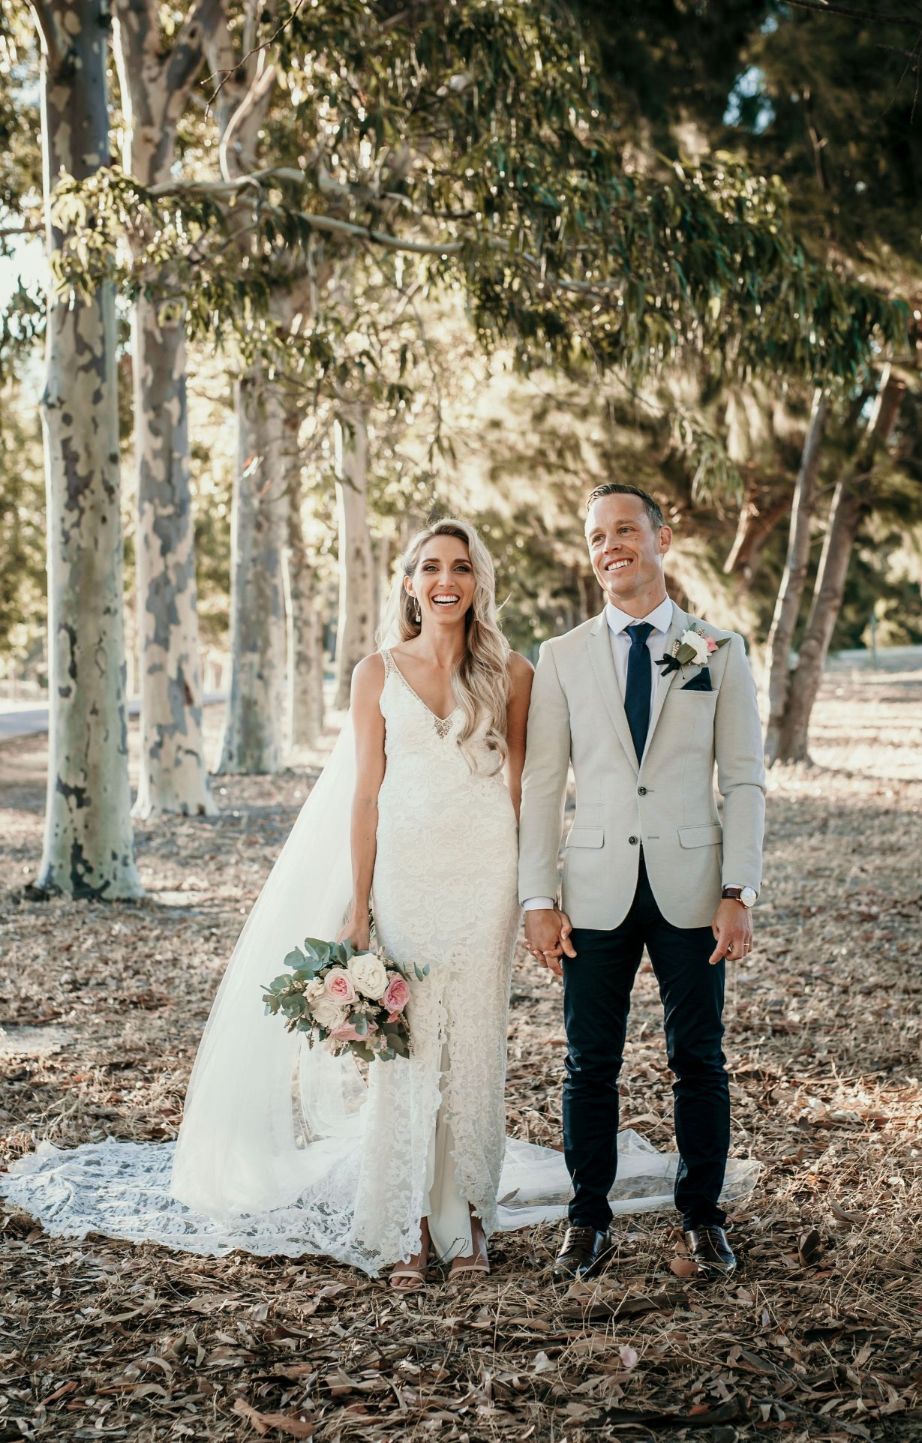 ayzia jade photography modern rustic winery wedding venue couple portraits grace loves lace floral design weddings stationery